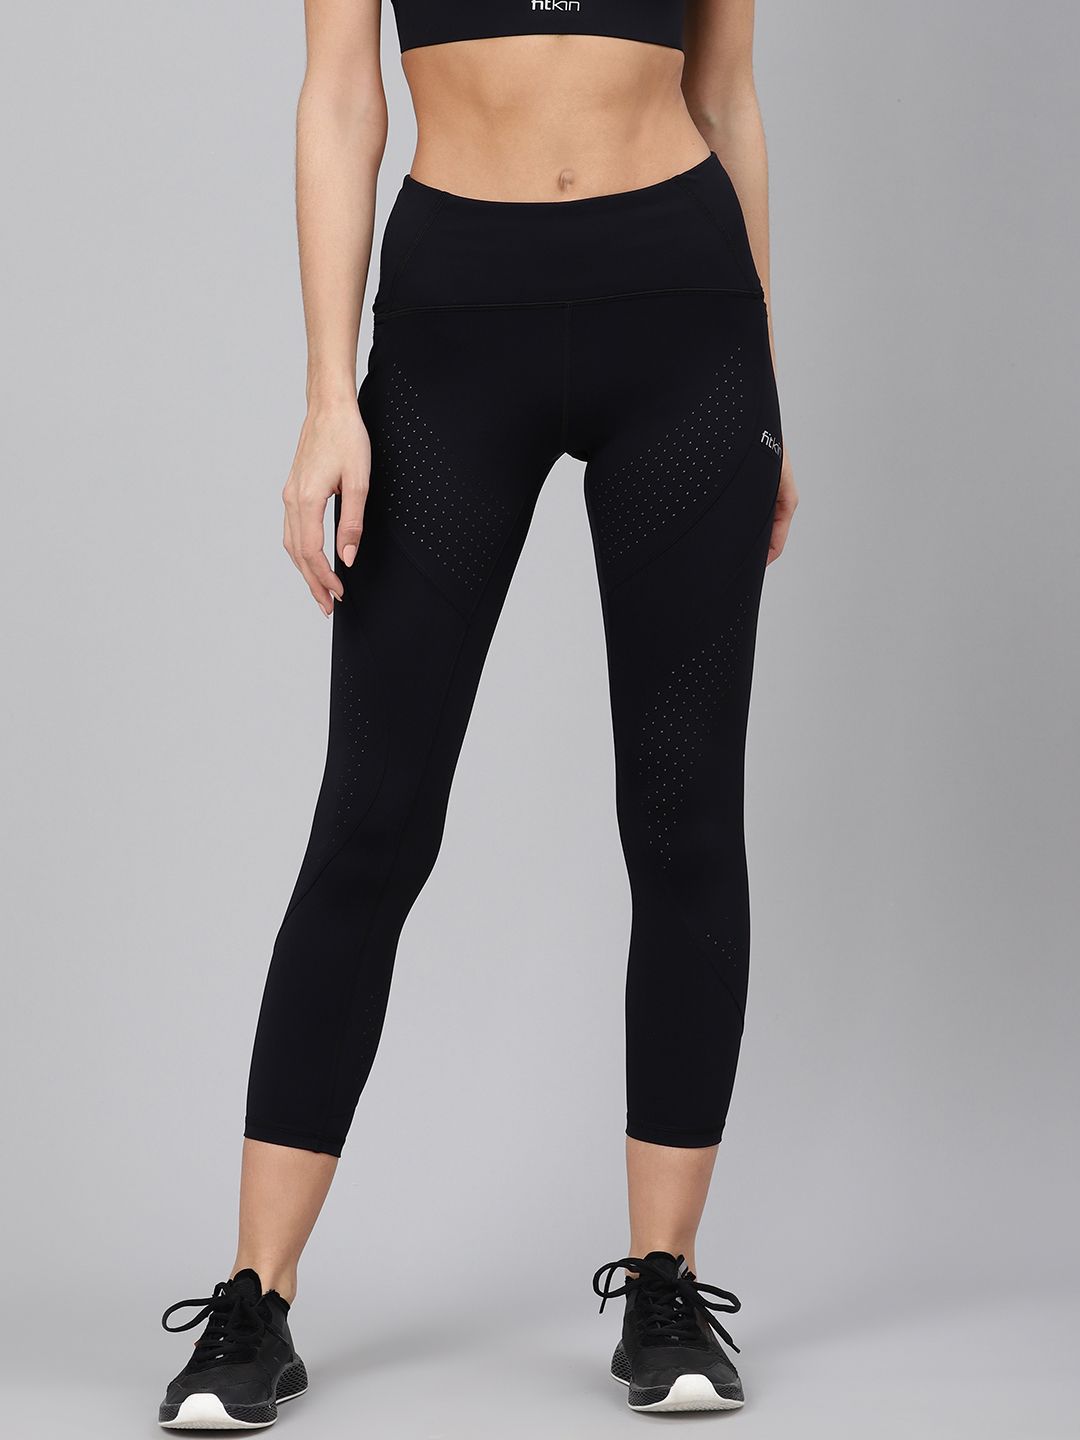 Fitkin Women Black Laser Cut Quick Dry Cropped Training Tights Price in India